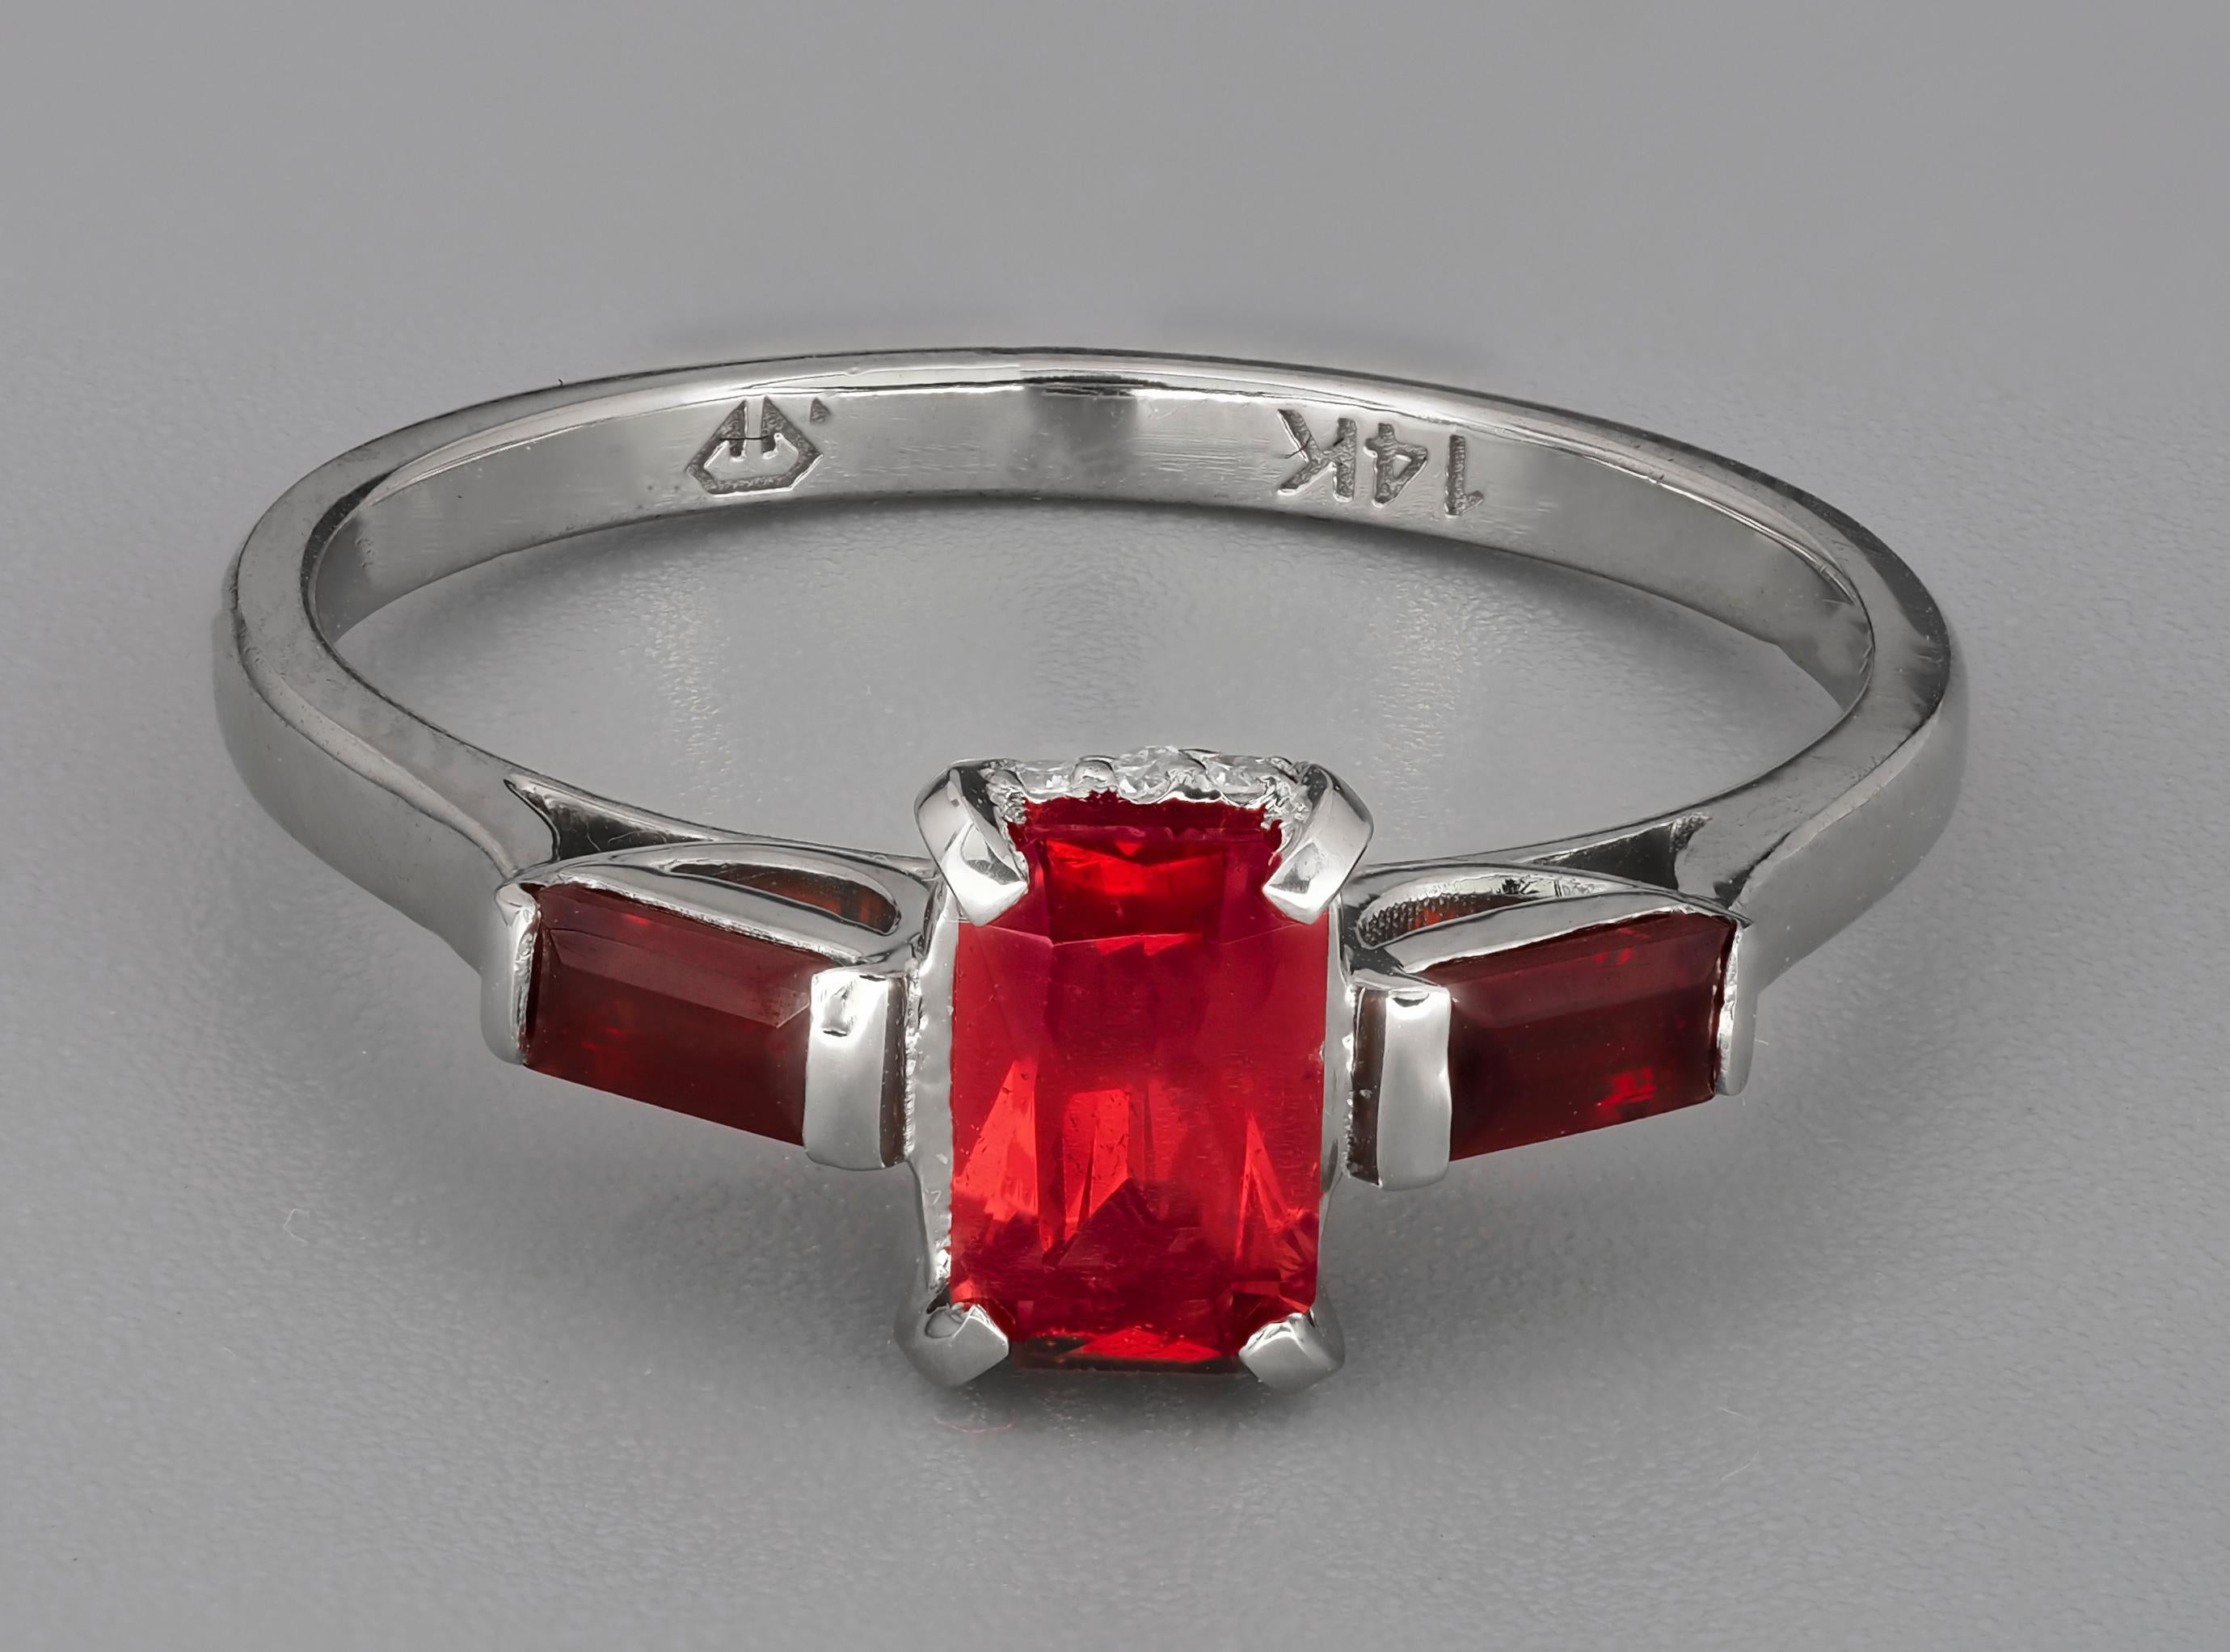 Baguette Garnet 14k gold Ring. 
January Birthstone Ring. Dainty Garnet Ring. Garnet statement ring. Garnet ring for woman.

Metal: 14k gold
Weight: 2.12 g. depends from size.

Set with garnet, color - red
Emerald cut, approx 0.70 ct in total (6 x 4